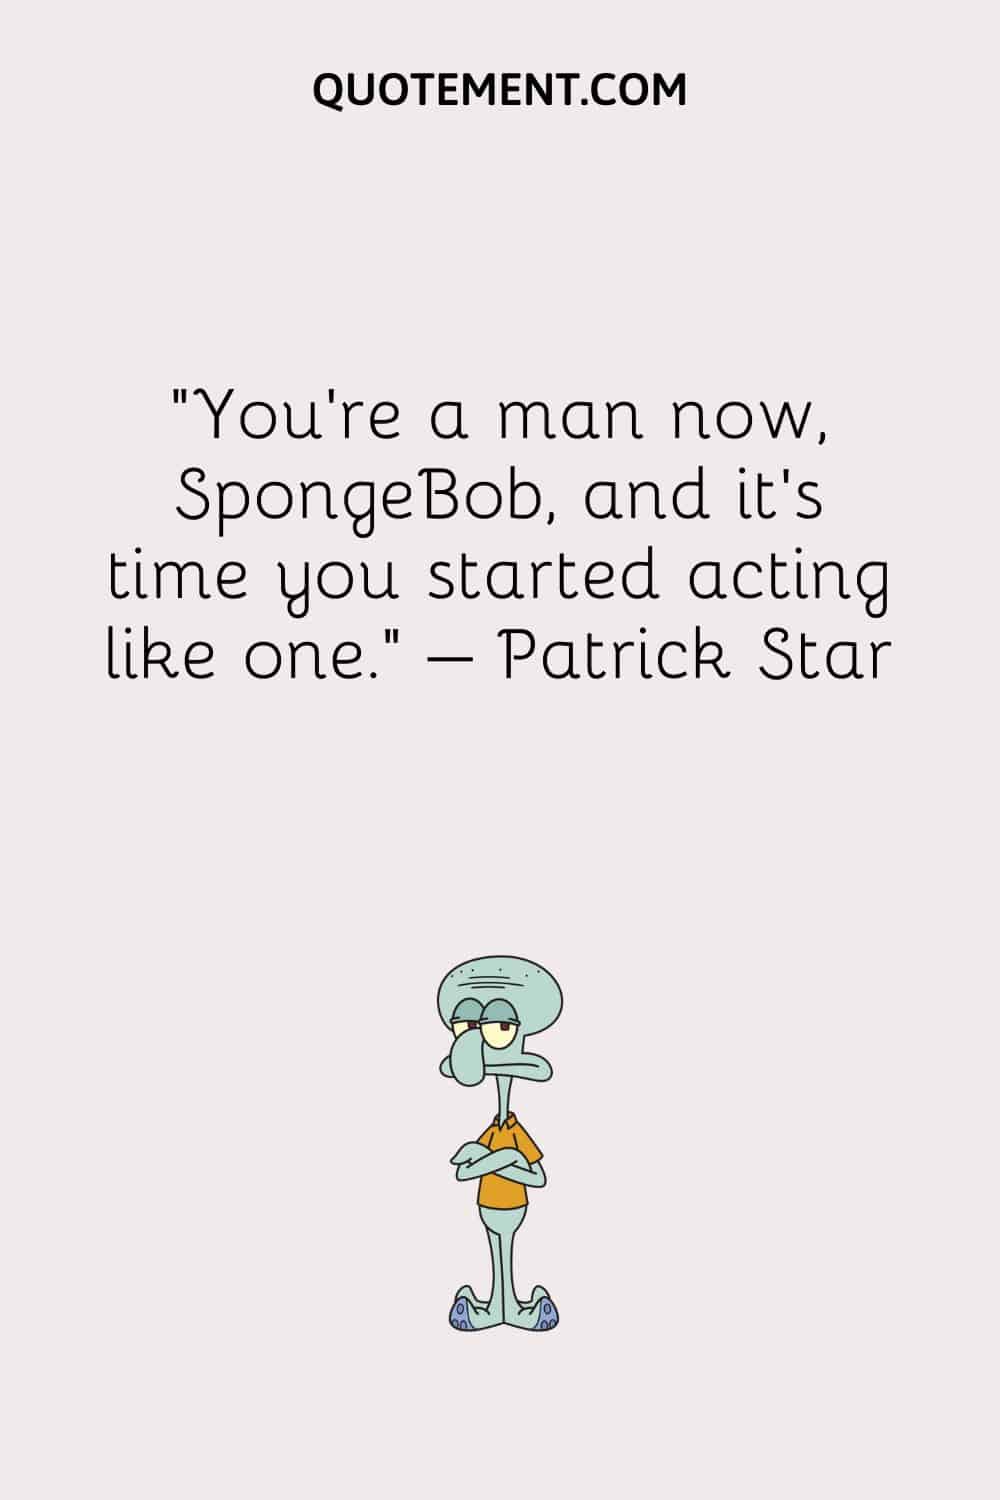 “You’re a man now, SpongeBob, and it’s time you started acting like one.” – Patrick Star